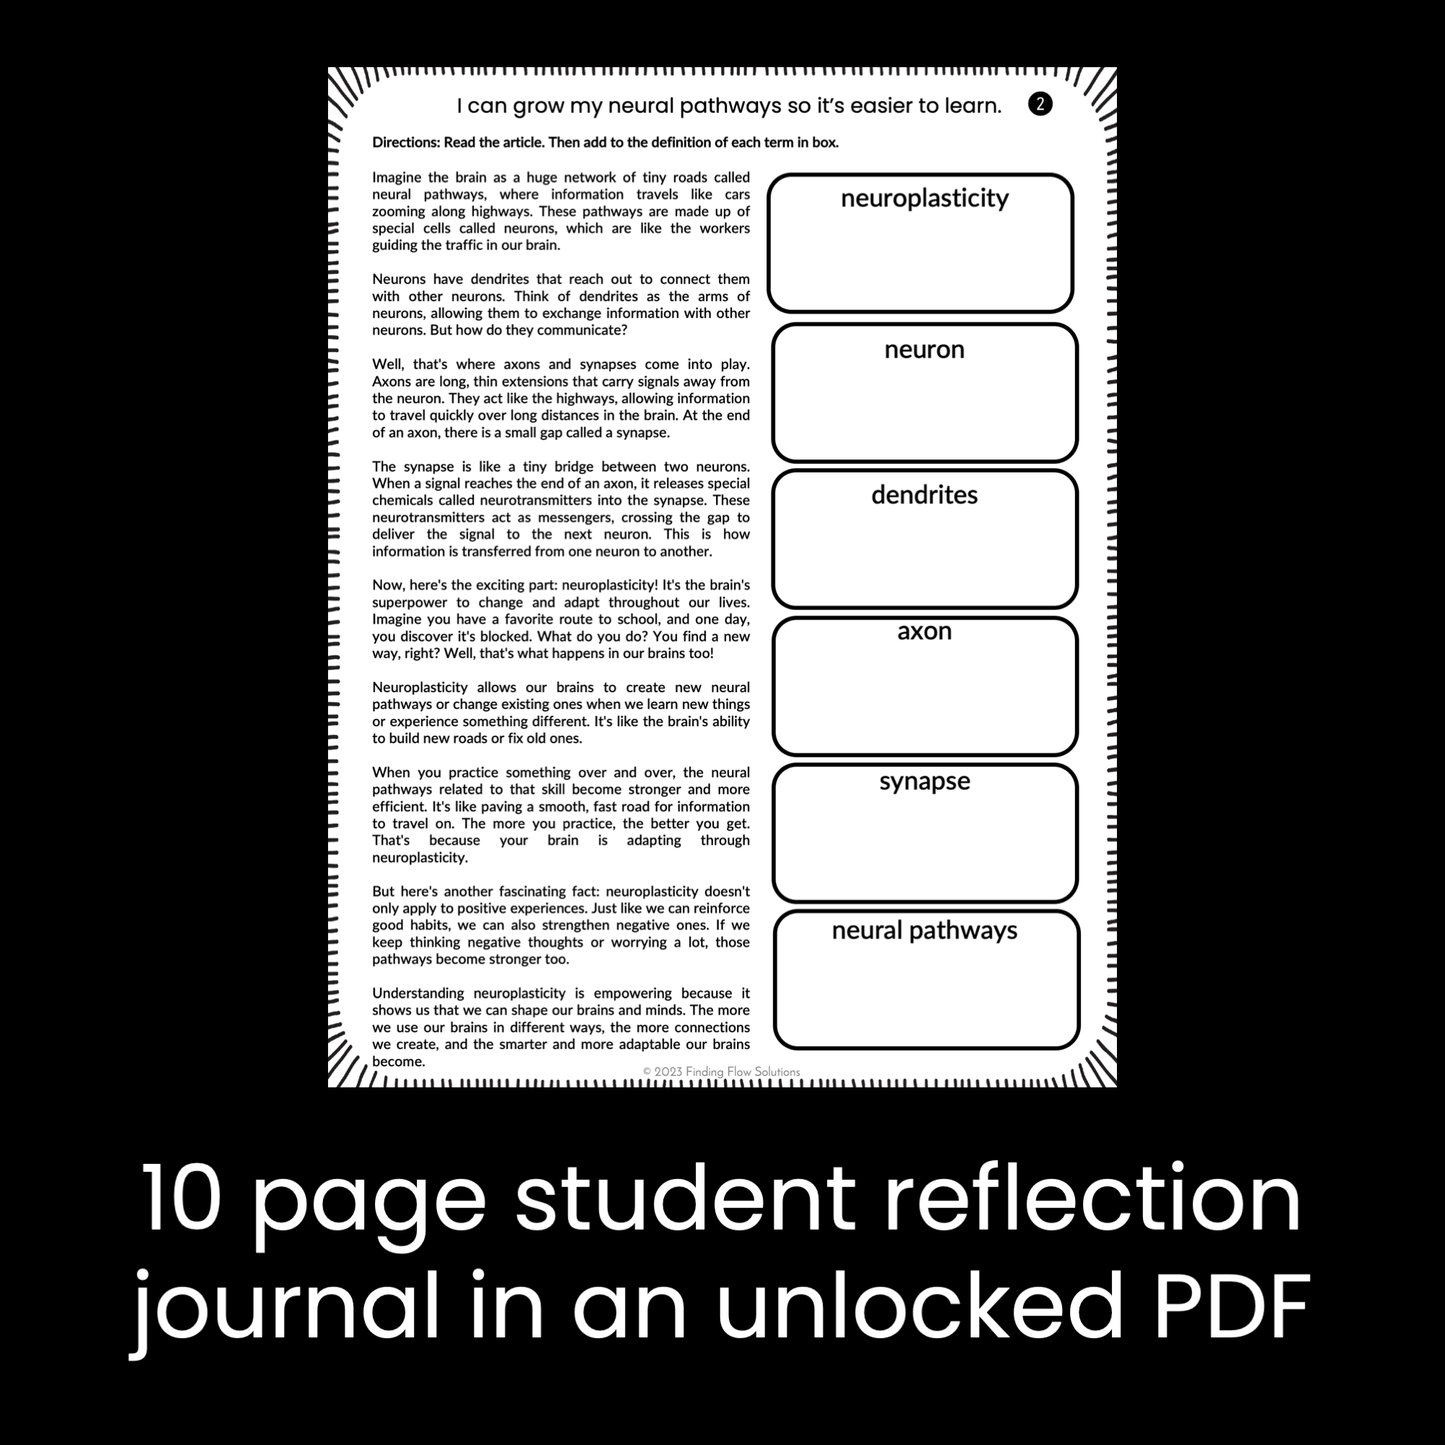 Neuroplasticity + Growth Mindset: 10 lessons with PPT and student journals